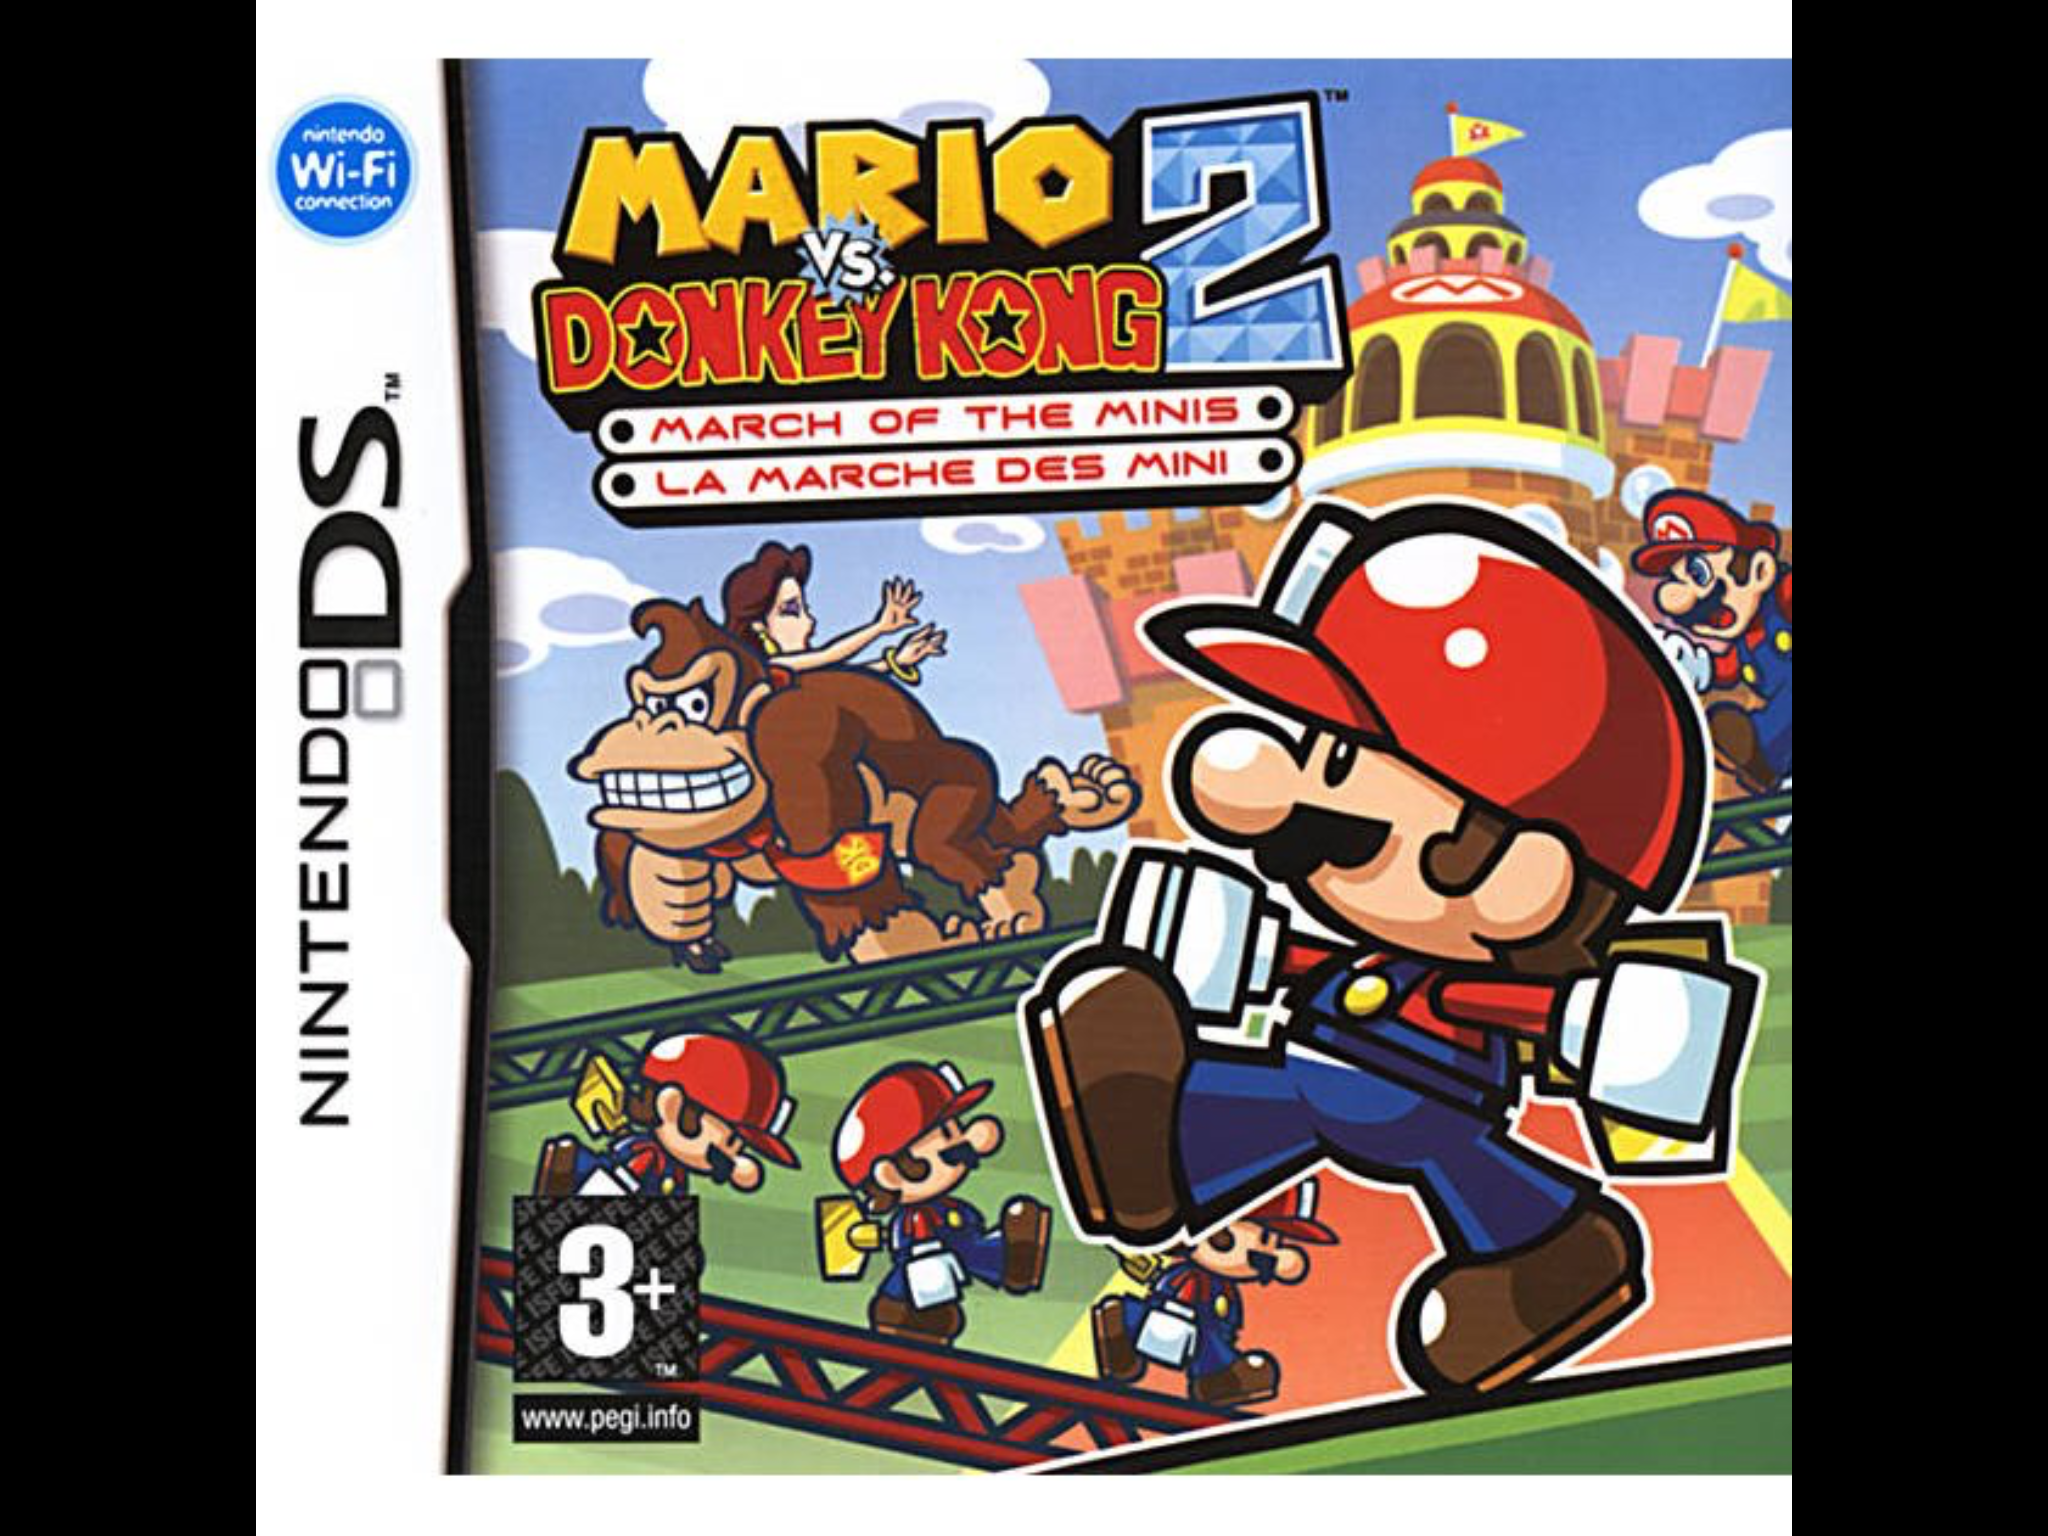 Mario vs. Donkey Kong 2: March of the Minis (Video Game 2006) - IMDb